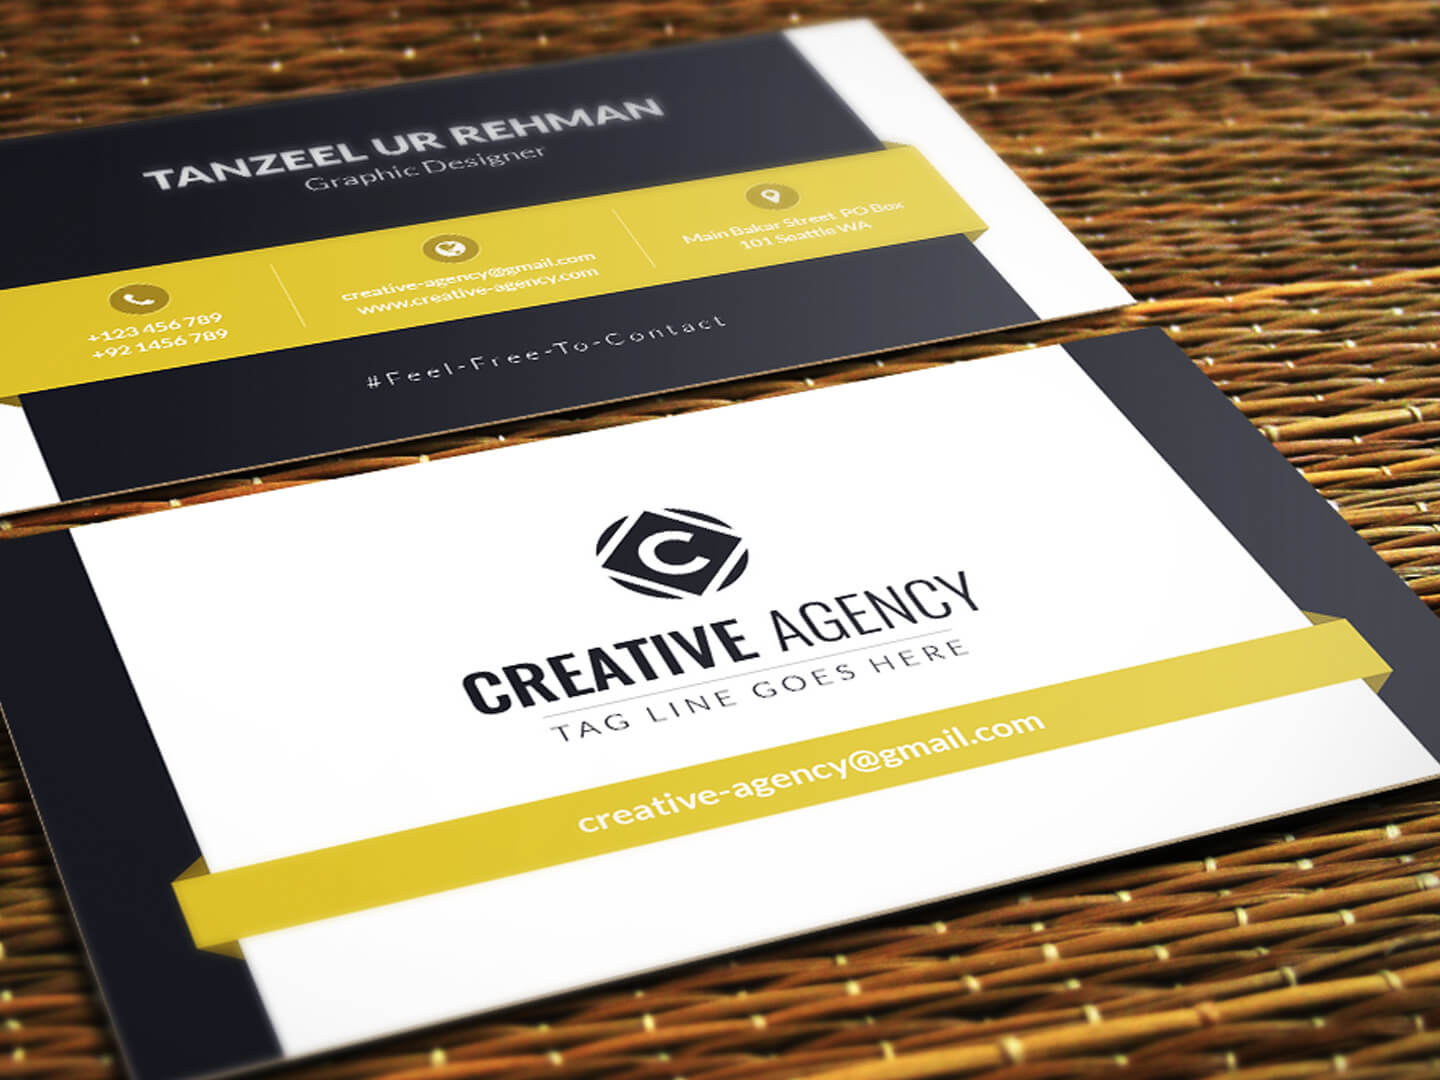 Business Cards Template – Free Downloadtanzeel Ur Rehman With Regard To Visiting Card Templates Download